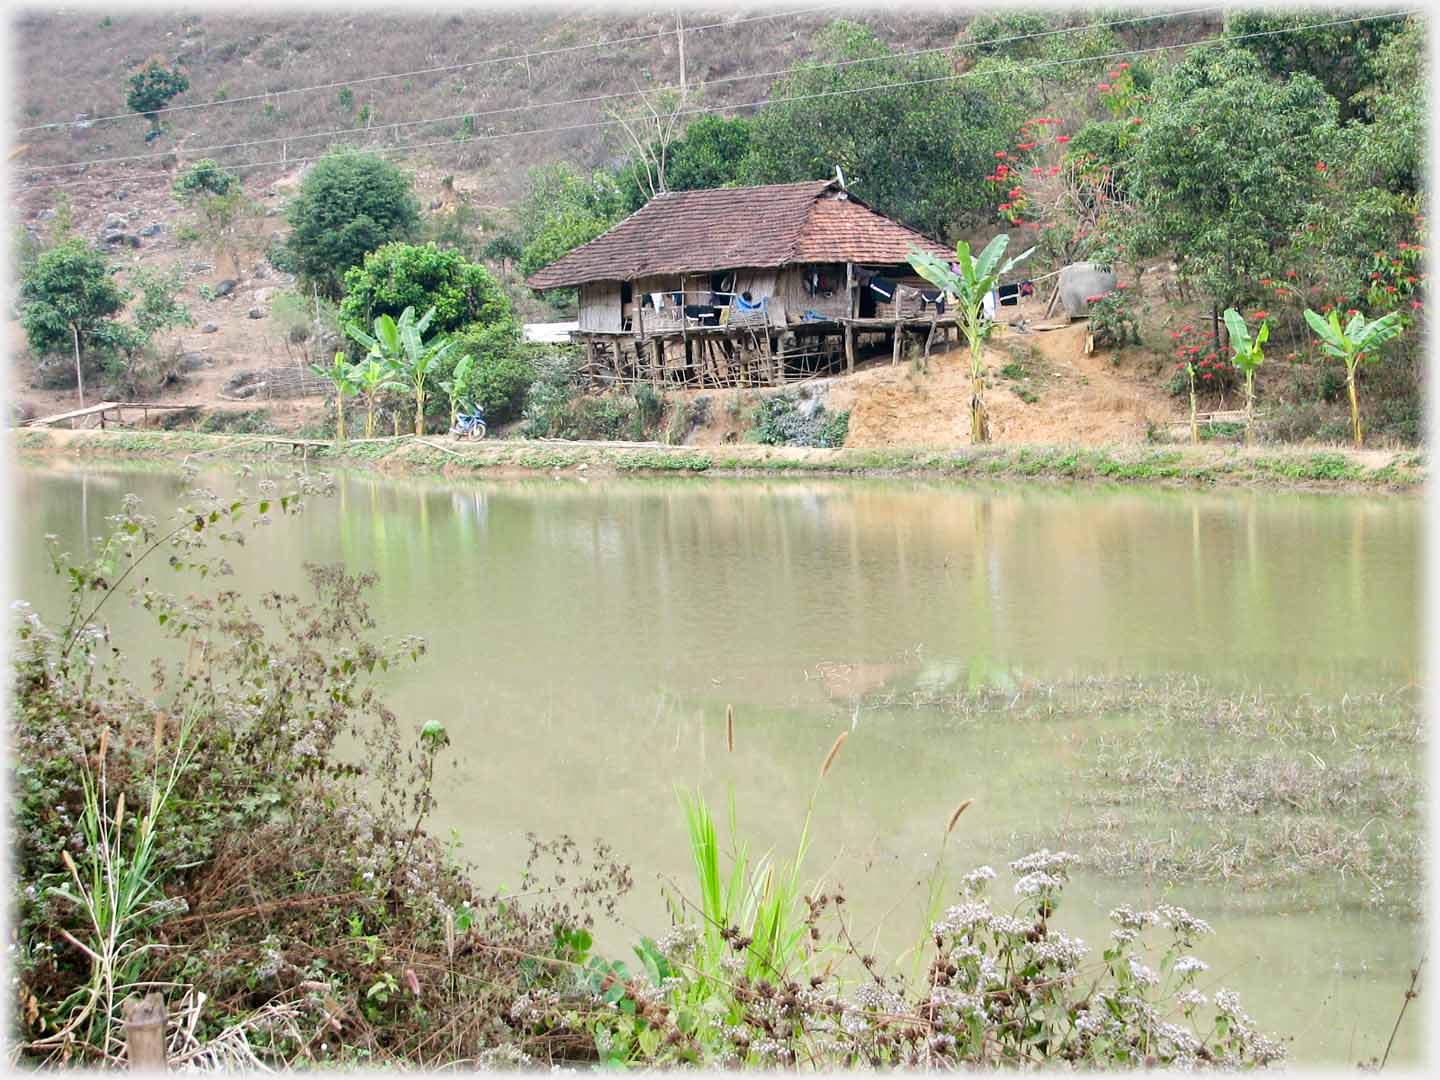 Stilt house seen across river with dotted banana trees.